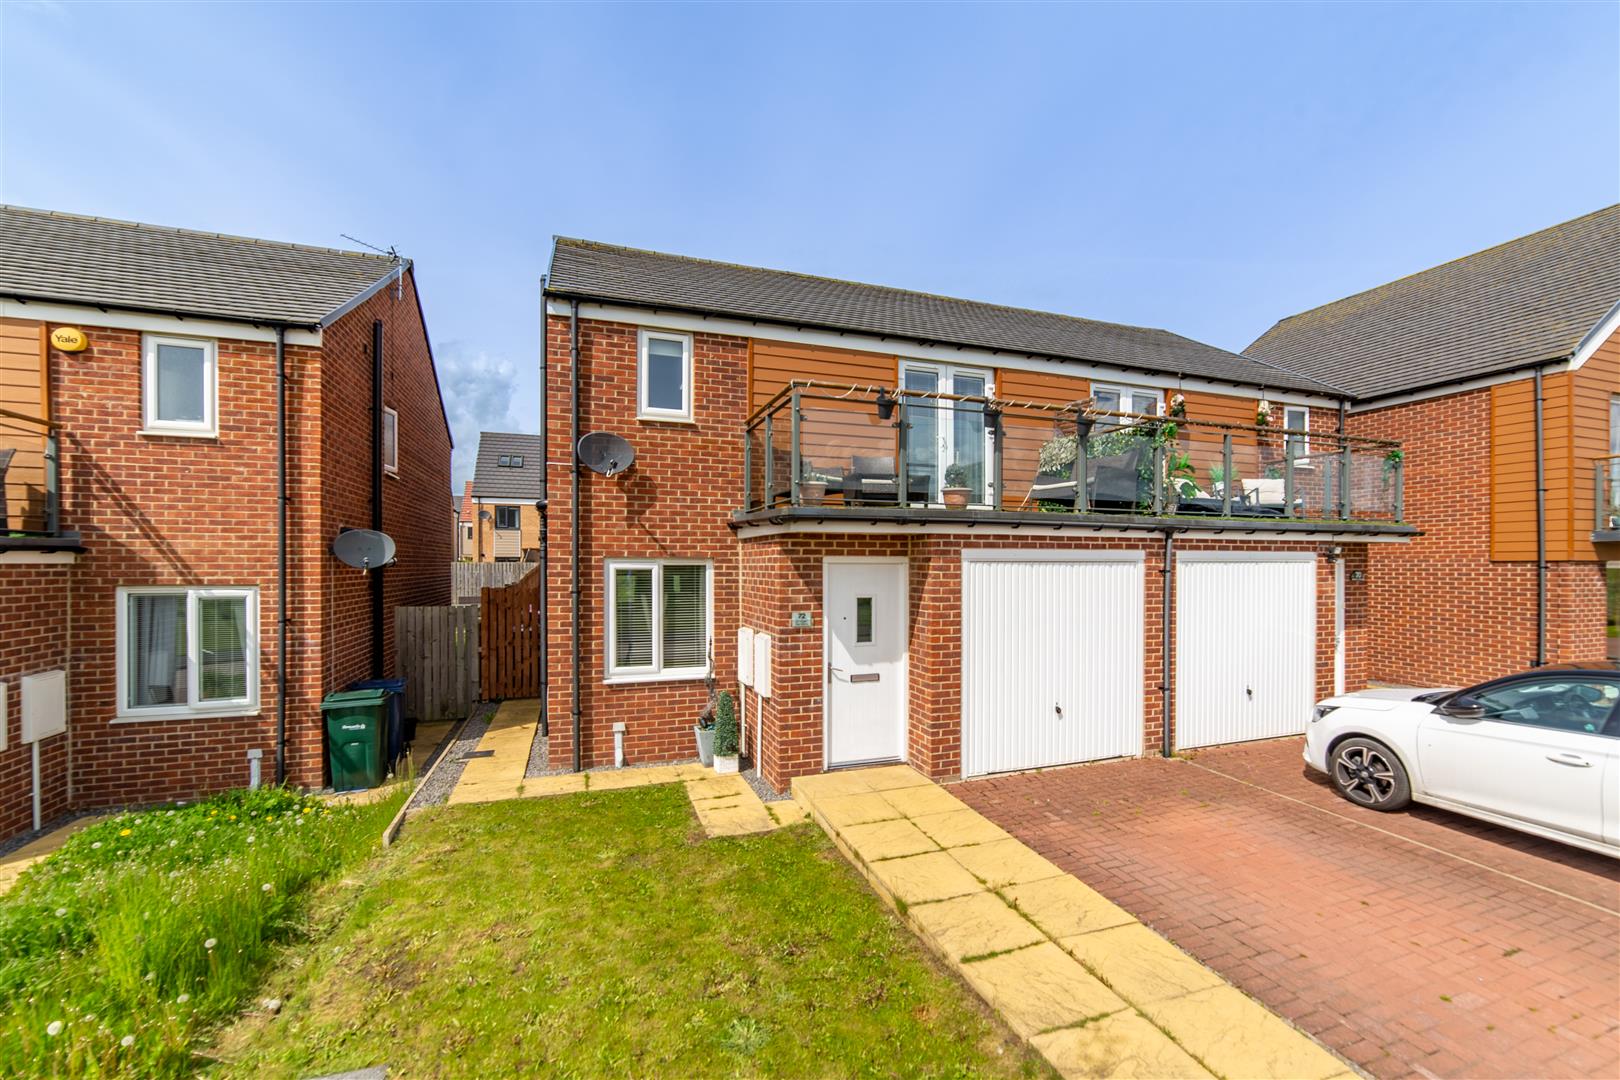 3 bed semi-detached house for sale in Bridget Gardens, Newcastle Upon Tyne, NE13